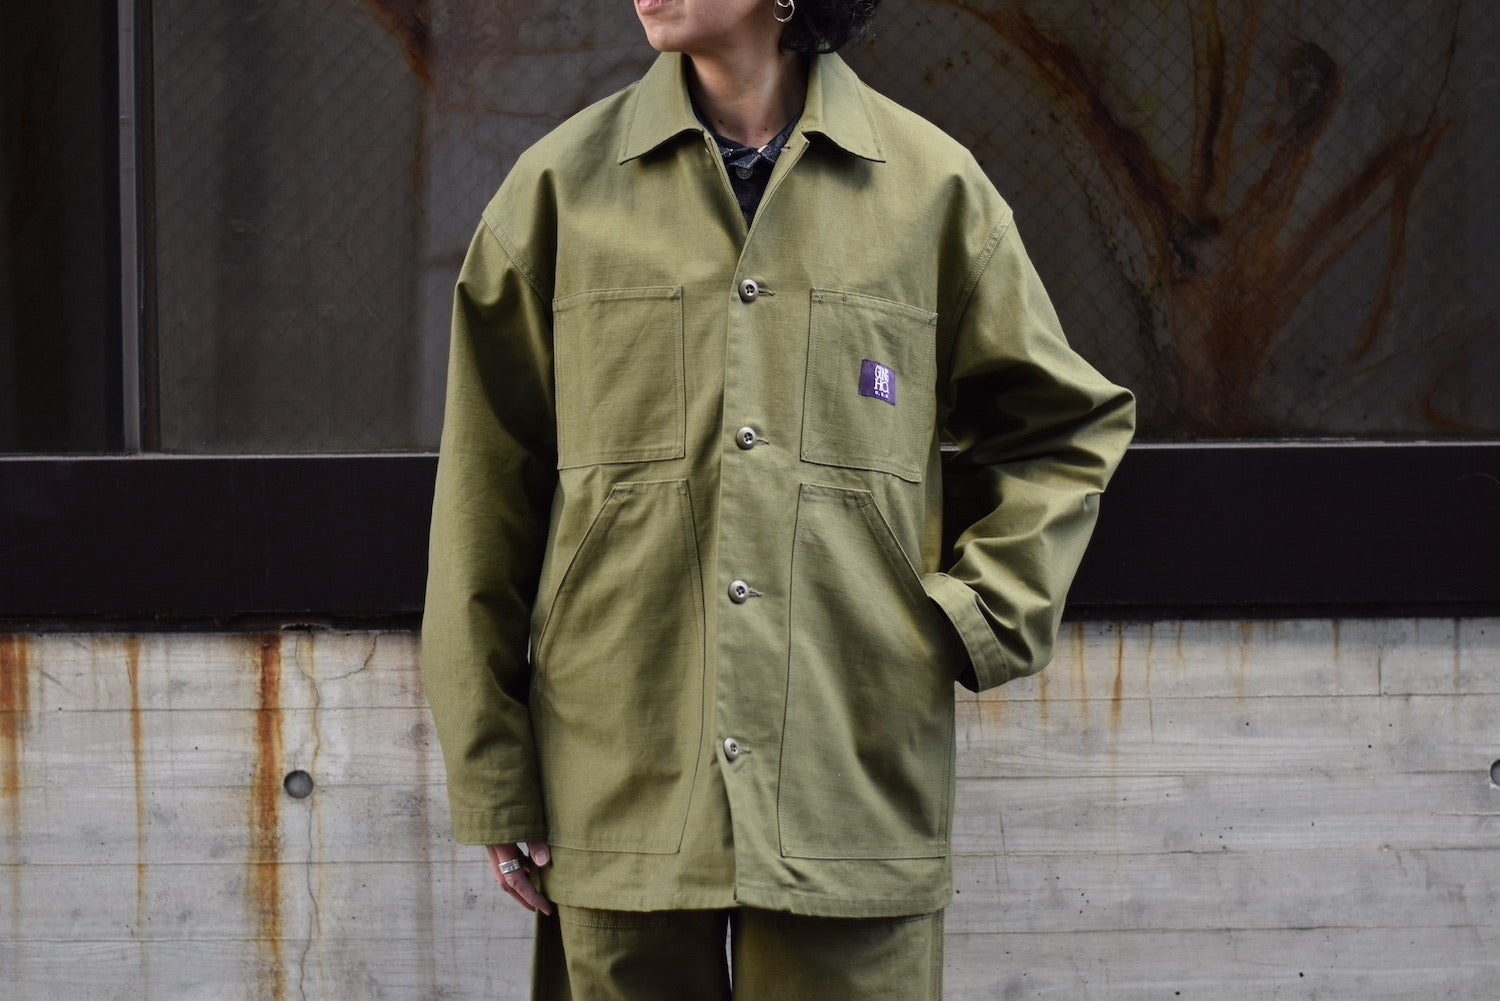 GUNG HO】セットアップもいけます!!FATIGUE JACKET&TROUSERS 